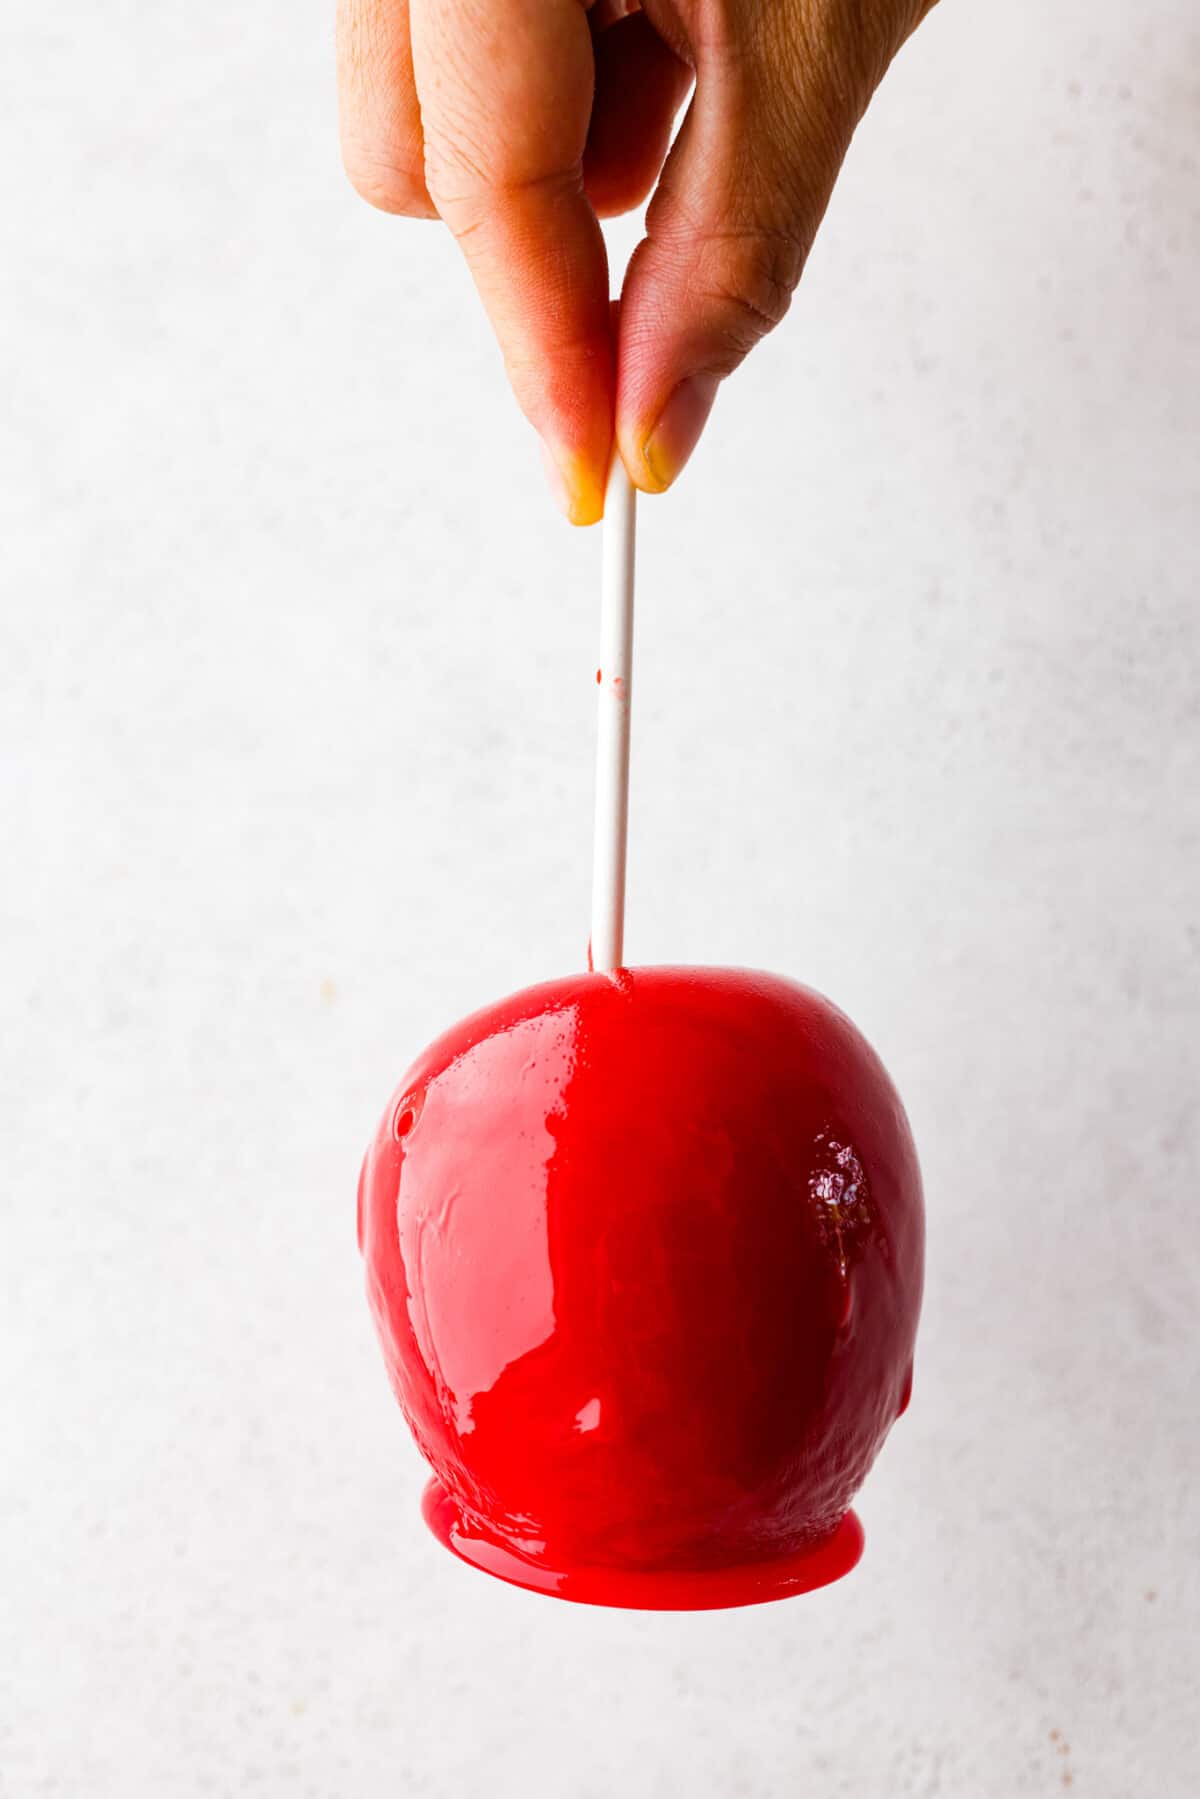 A whole candied apple being picked up by the stick.